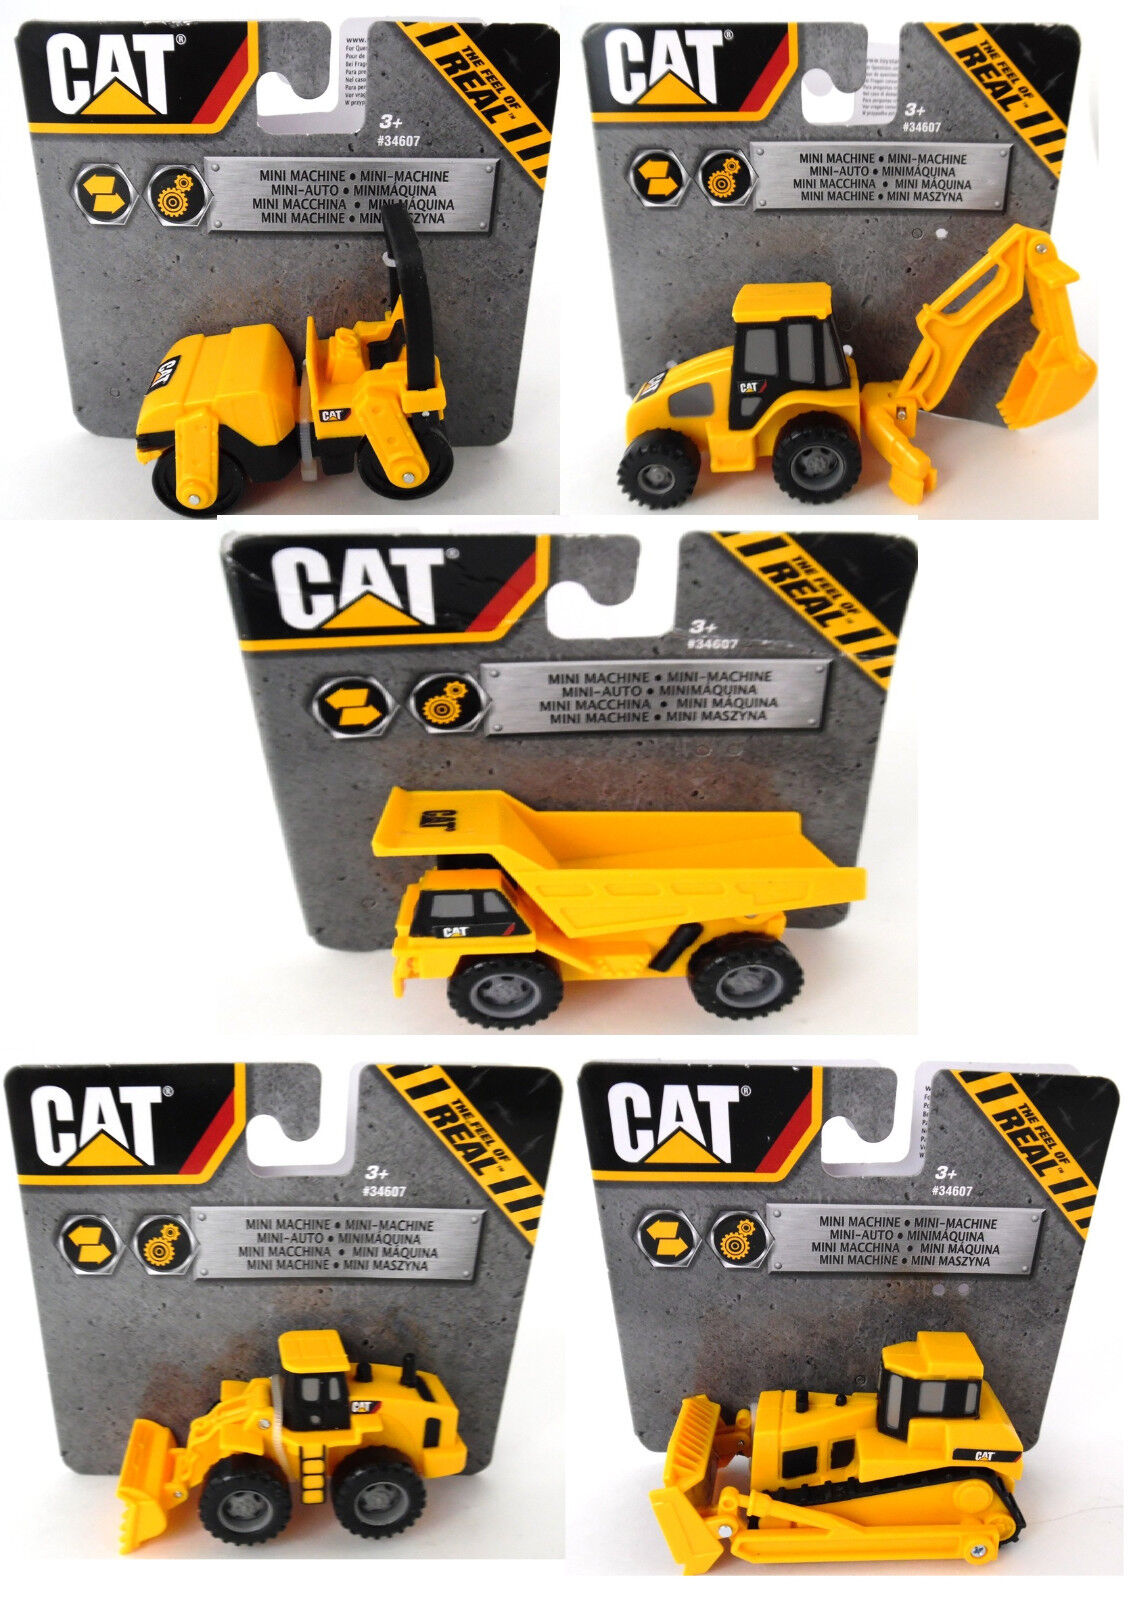 Cat Mini Machine Construction Vehicles Industrial Ages 3+ Lot of 5 Different 